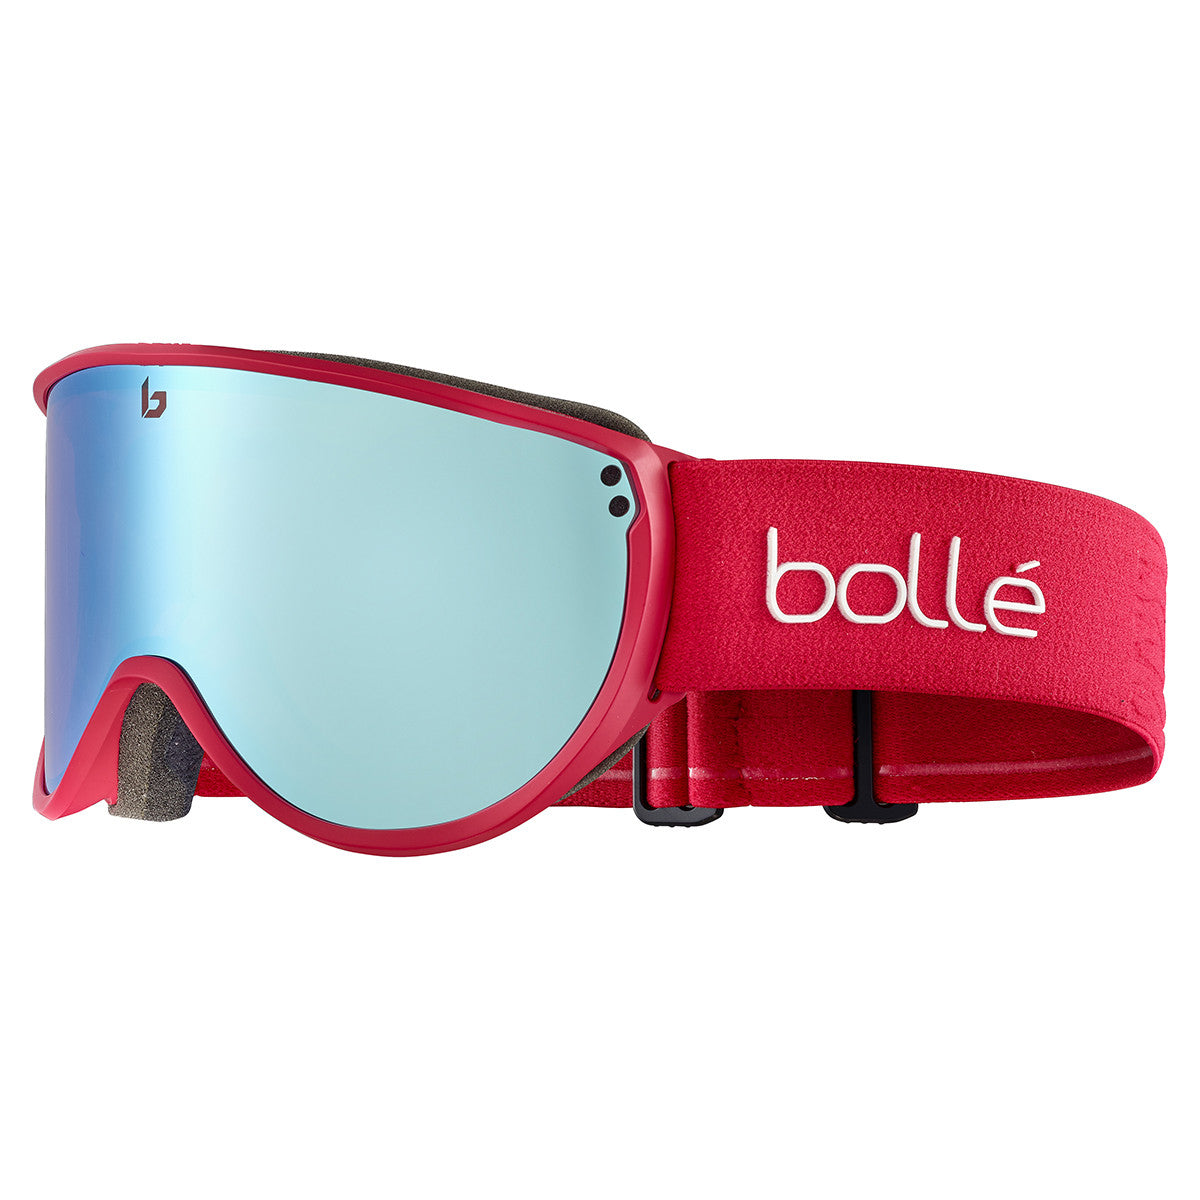 Bolle Blanca Goggles  Carmine Red Matte Small One size